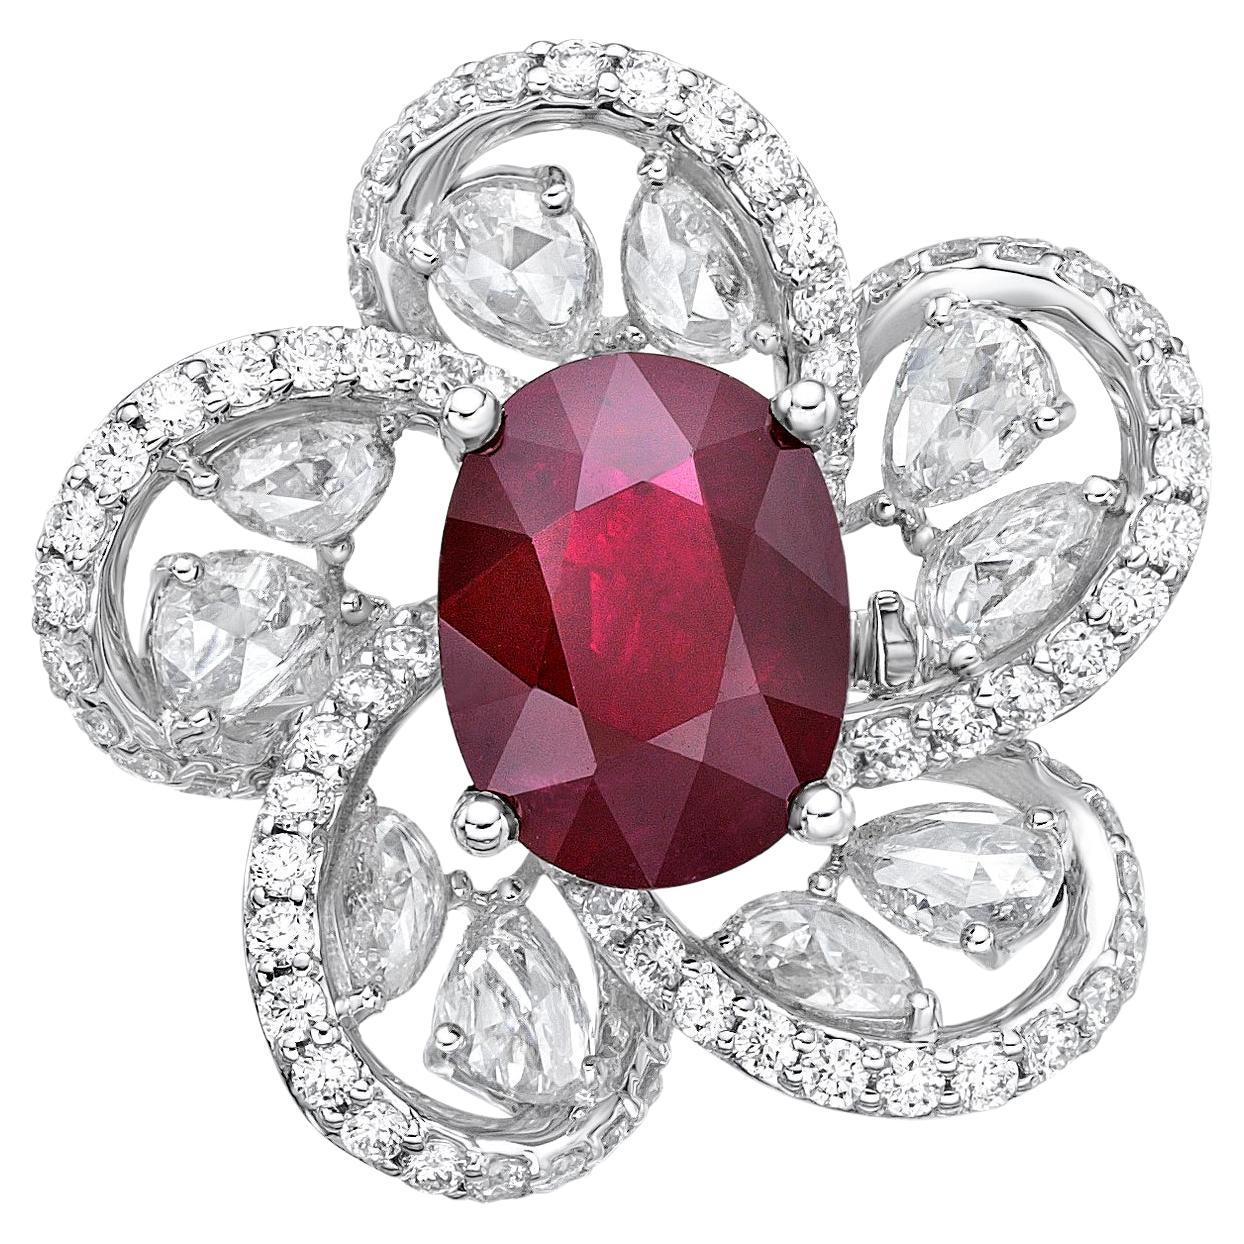 GRS Certified 3.29 Carat Ruby and Diamond Ring in 18 Karat White Gold For Sale